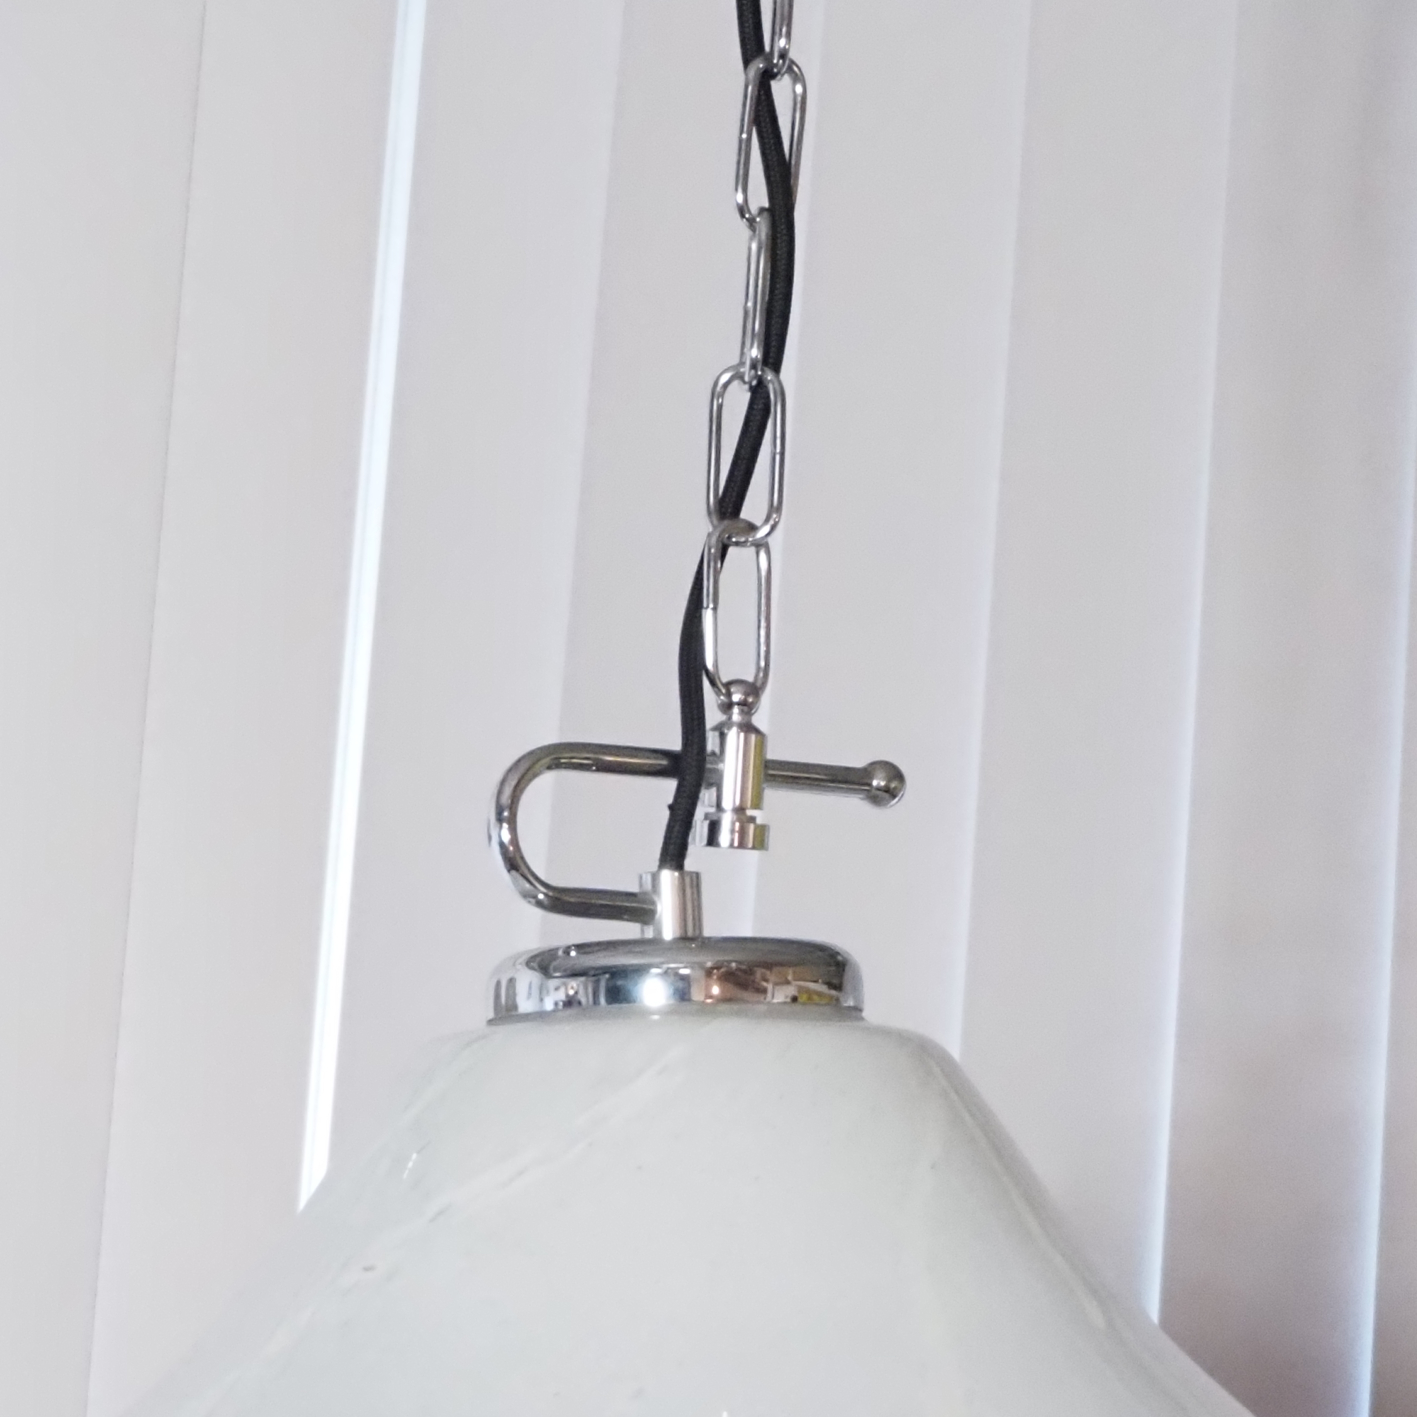 Hanging light in white marbled glass